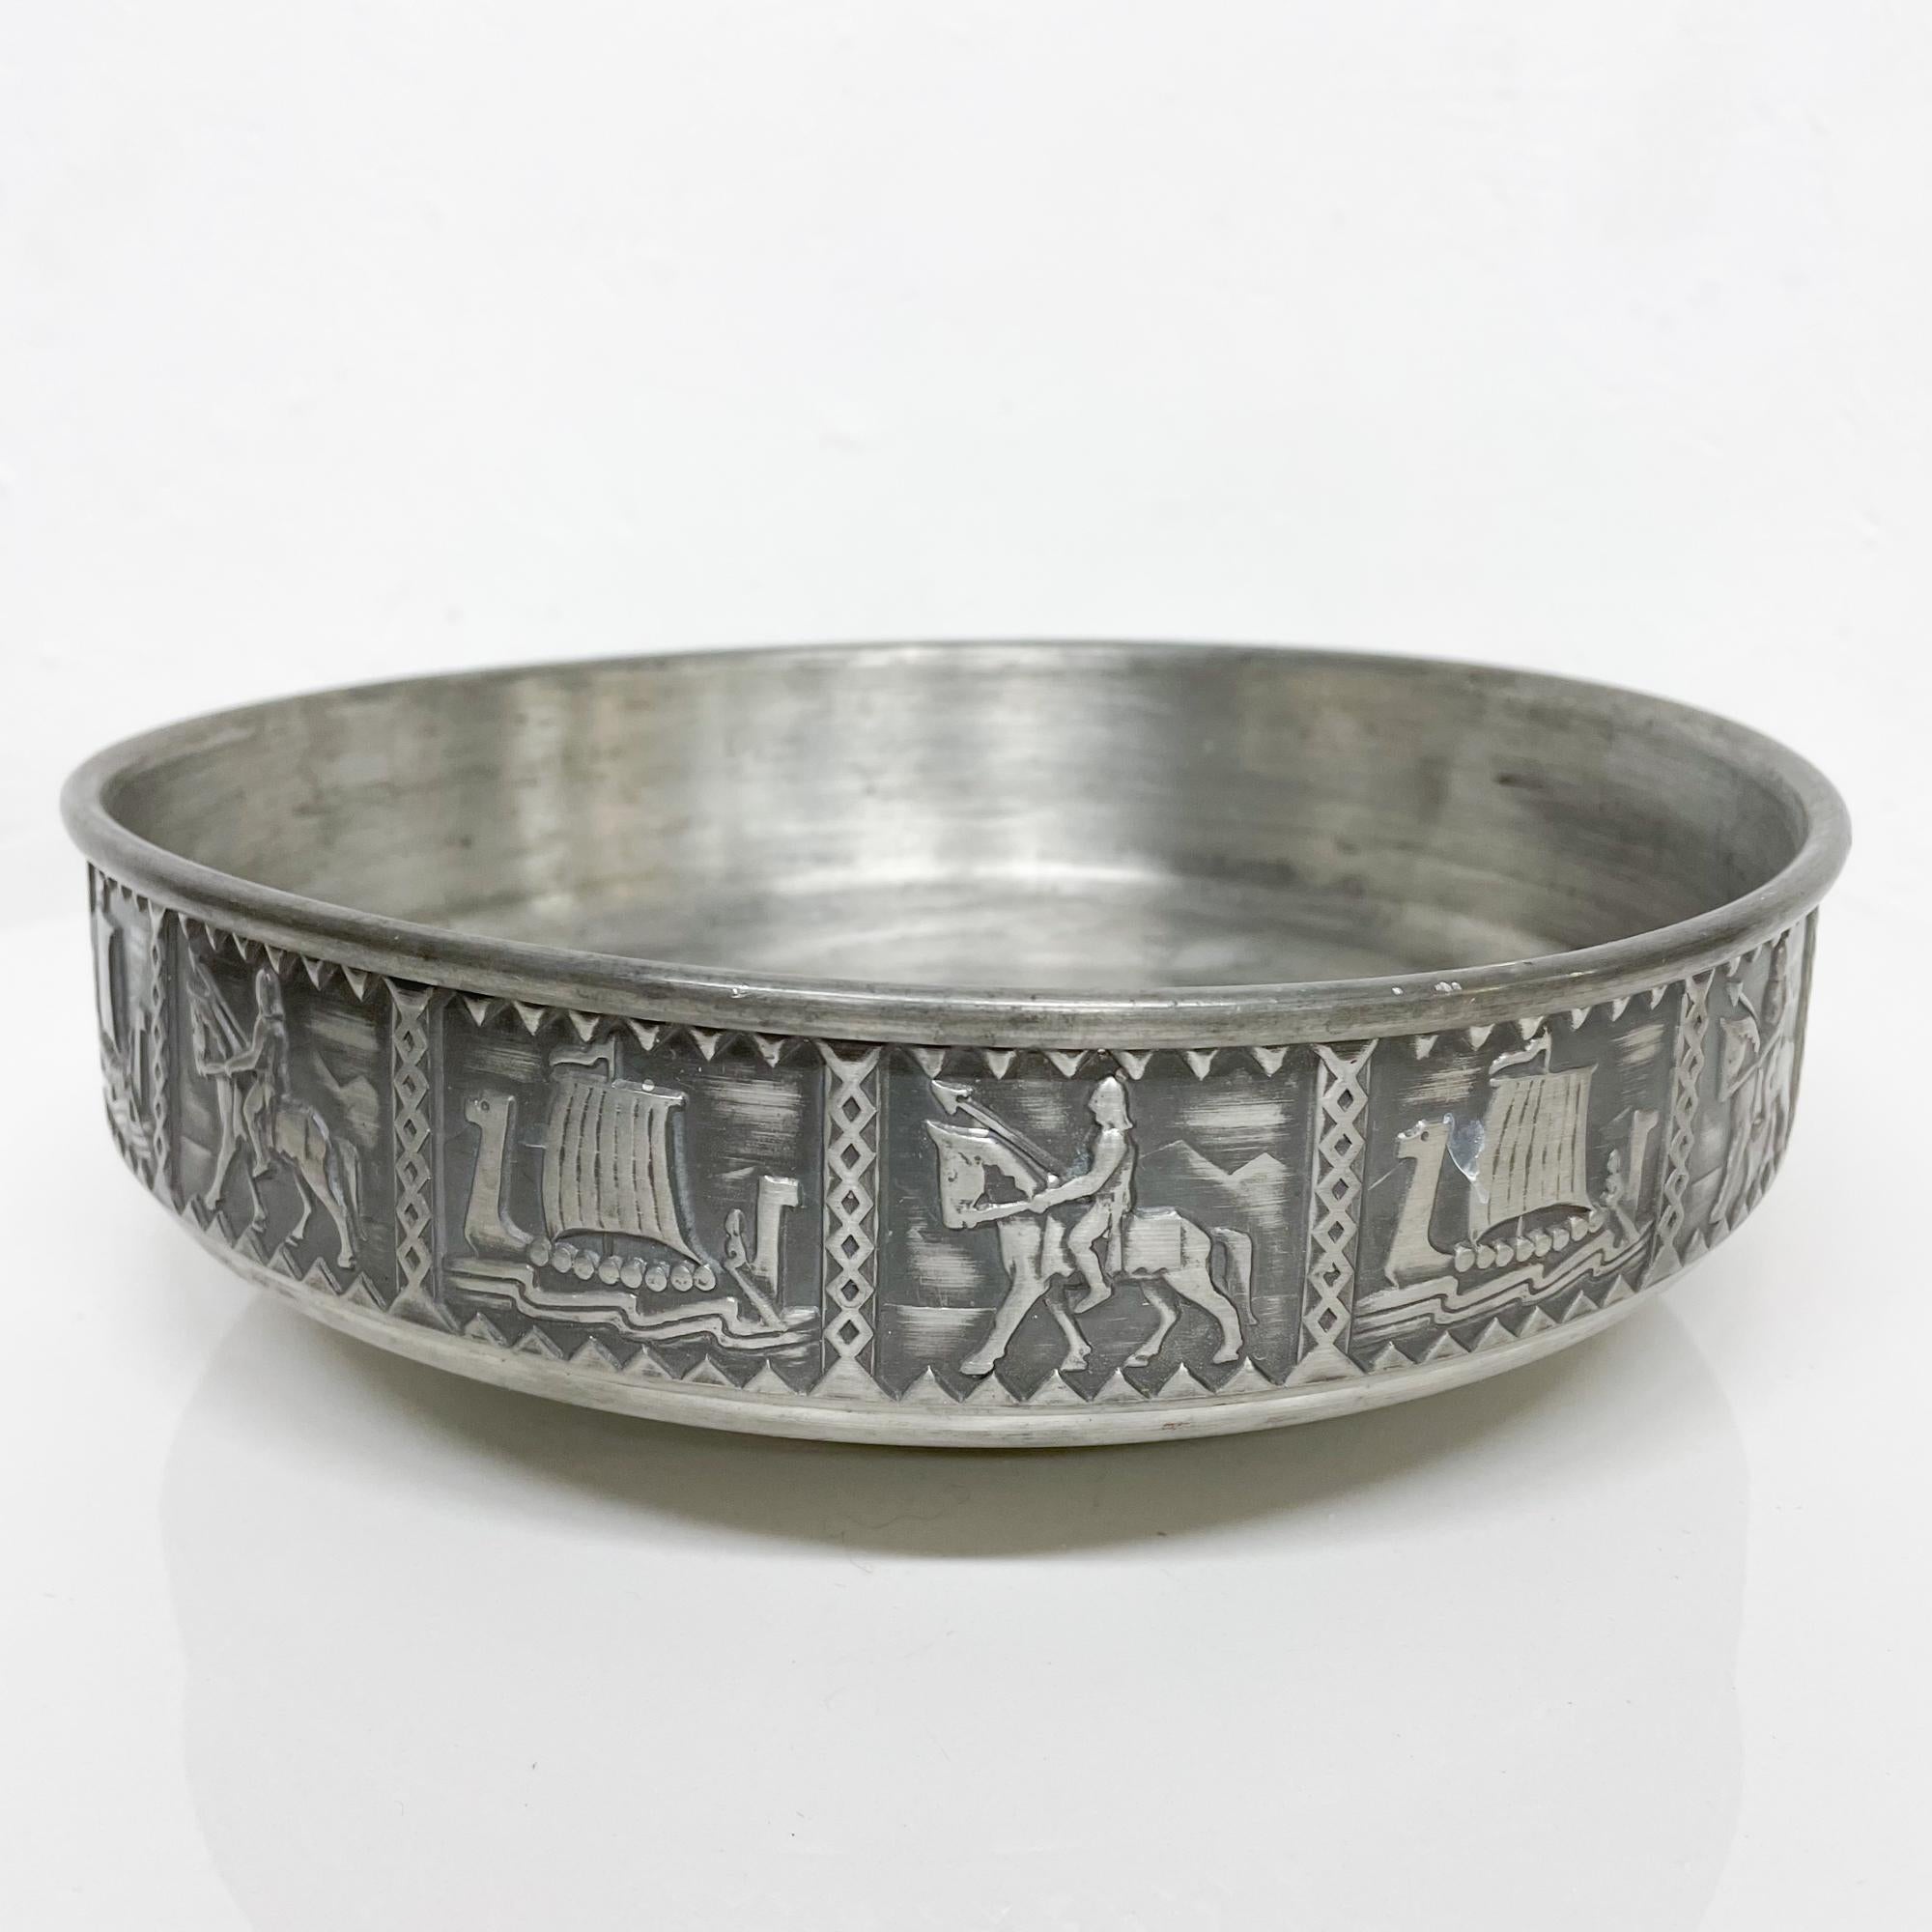 For your consideration a footed bowl with coat of arm decoration designed by Norr Norsk.
Stamped on the bottom with the maker's logo.
Viking Motif decoration.
Made in Norway, circa 1980s.
Dimensions: 10.13